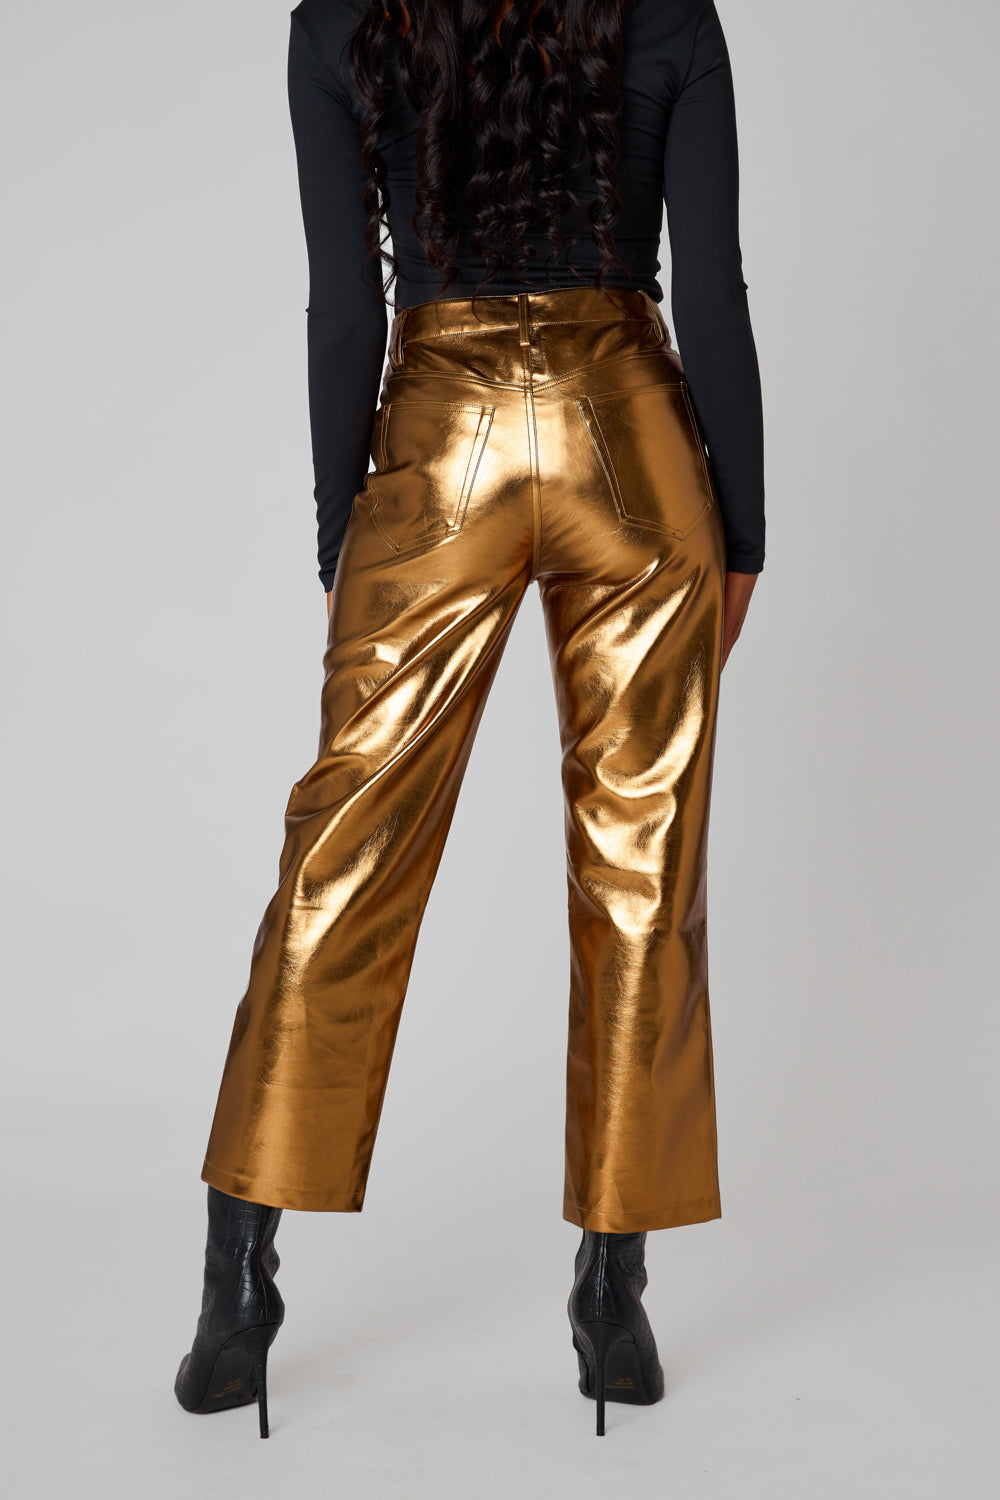 Buy Gold-Toned Pants for Women by AVAASA MIX N' MATCH Online | Ajio.com